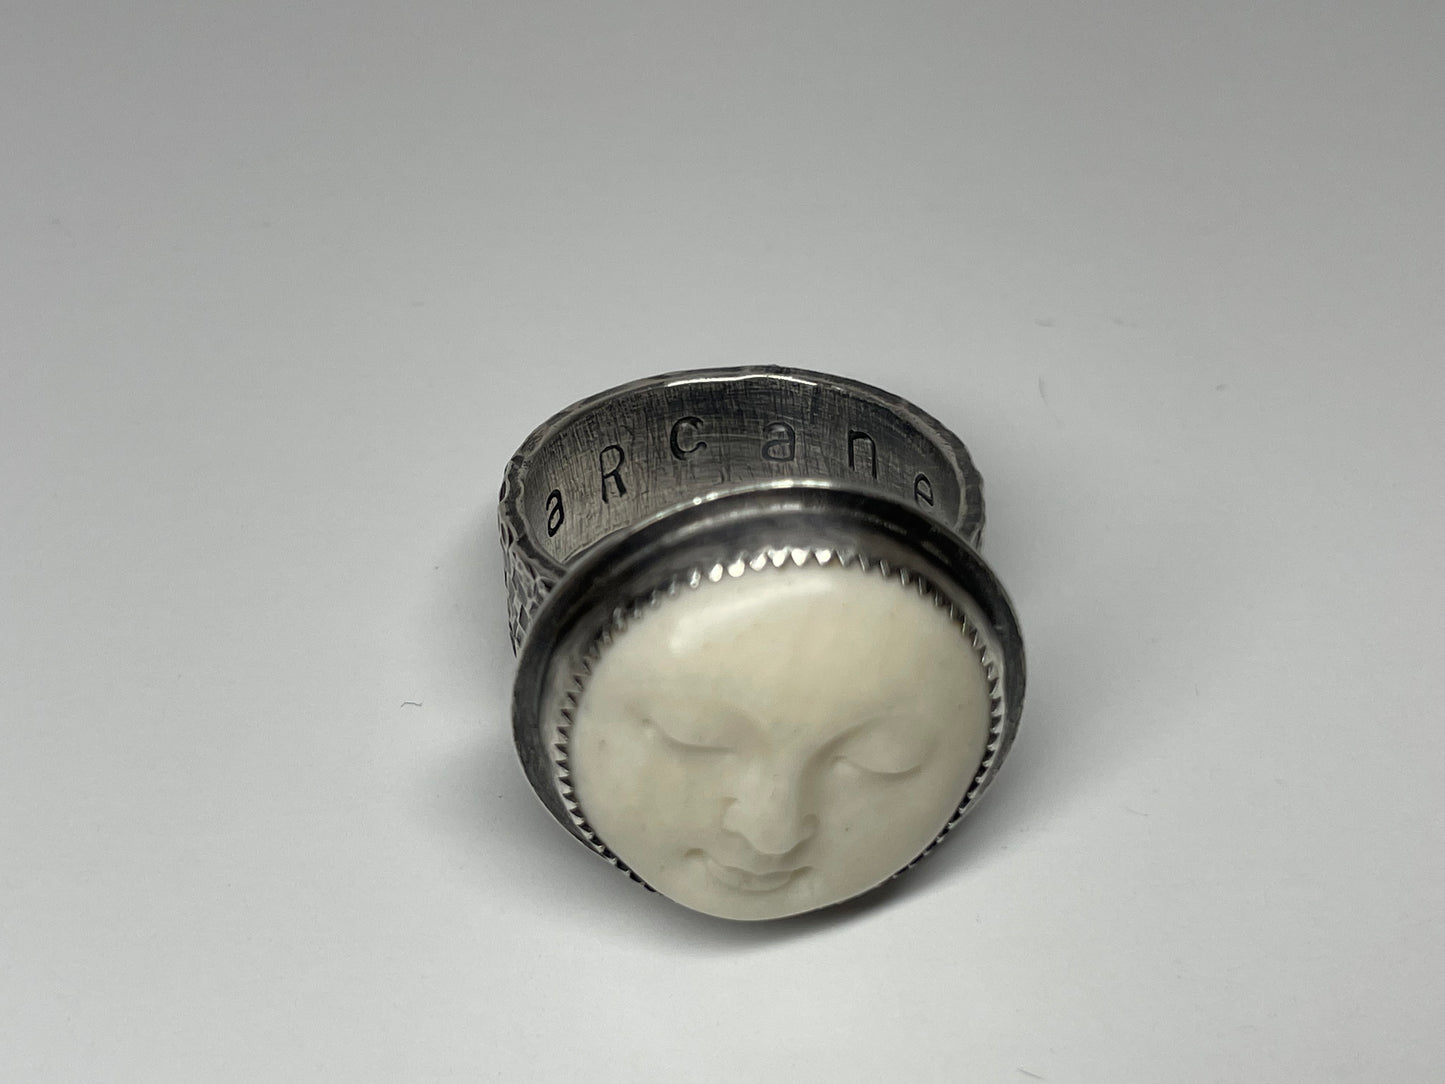 Carved Bone and Sterling Ring - US 10.5